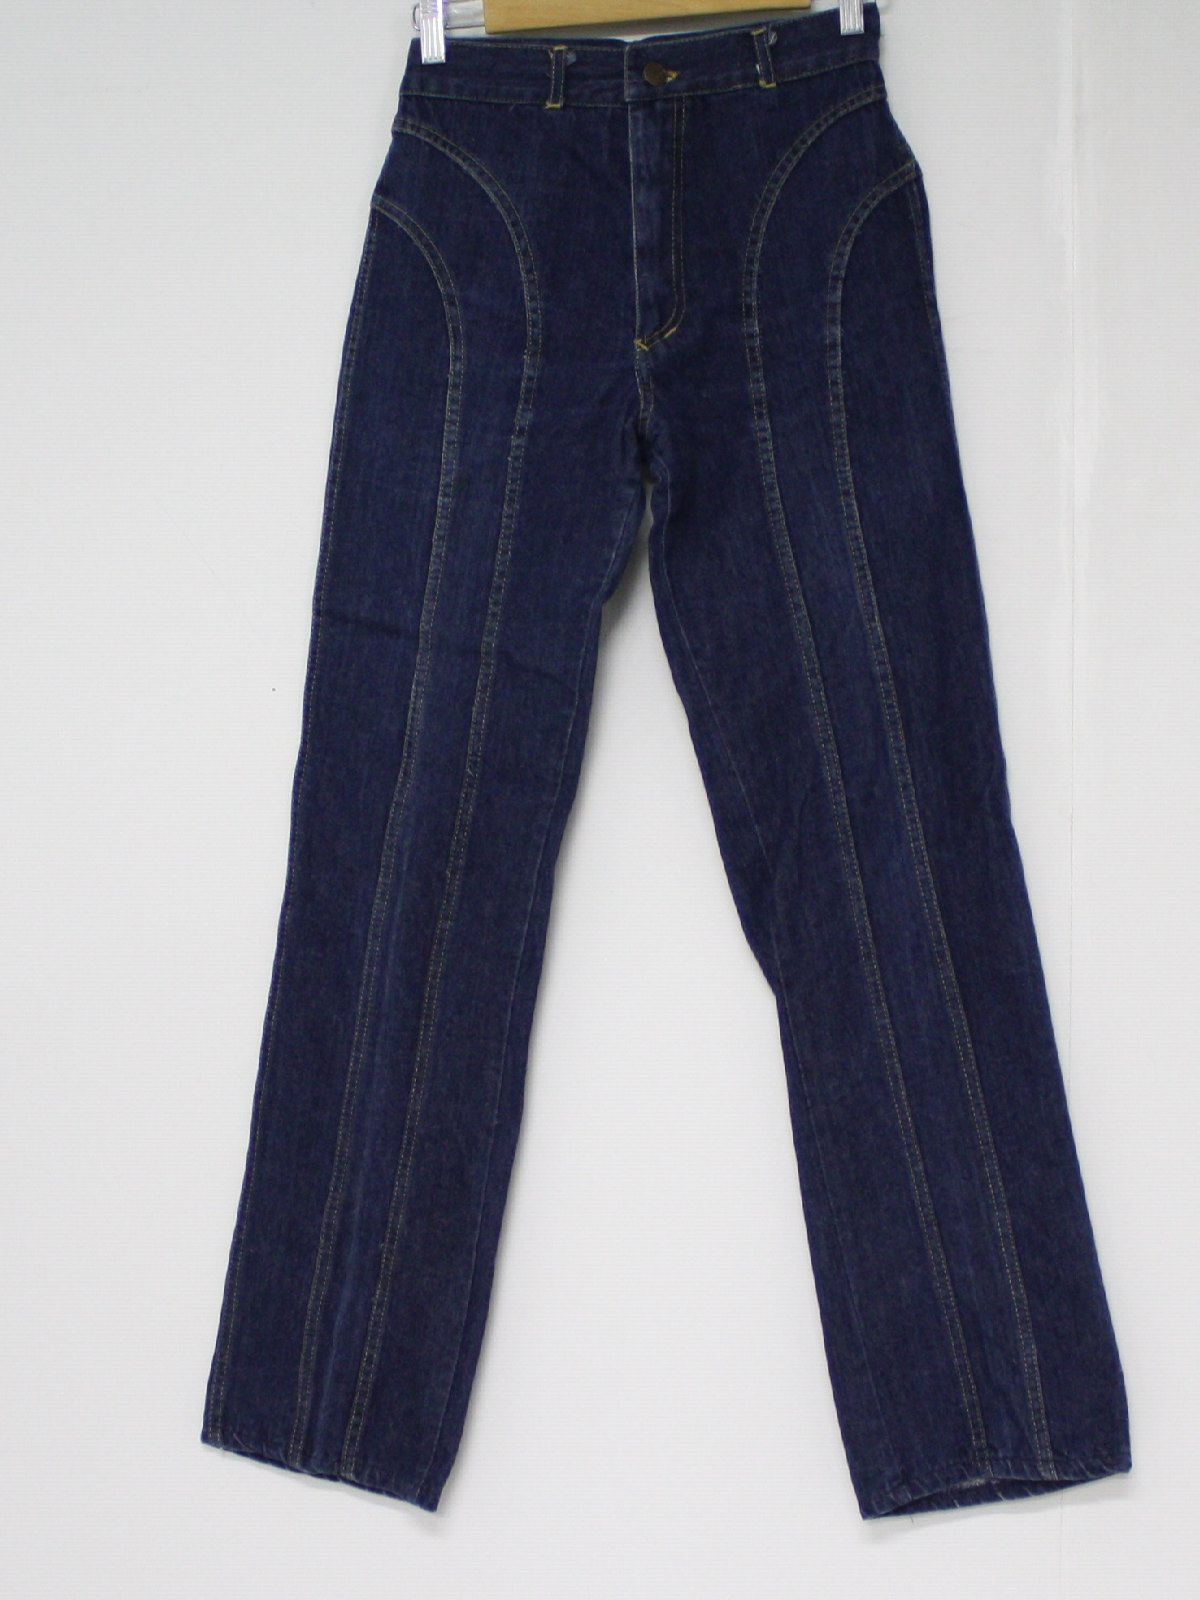 Fredericks of Hollywood Eighties Vintage Pants: 80s -Fredericks of Hollywood-  Womens dark blue cotton denim with dark gold topstitching, totally 80s  straight leg designer jeans pants with double back pointed yoke and